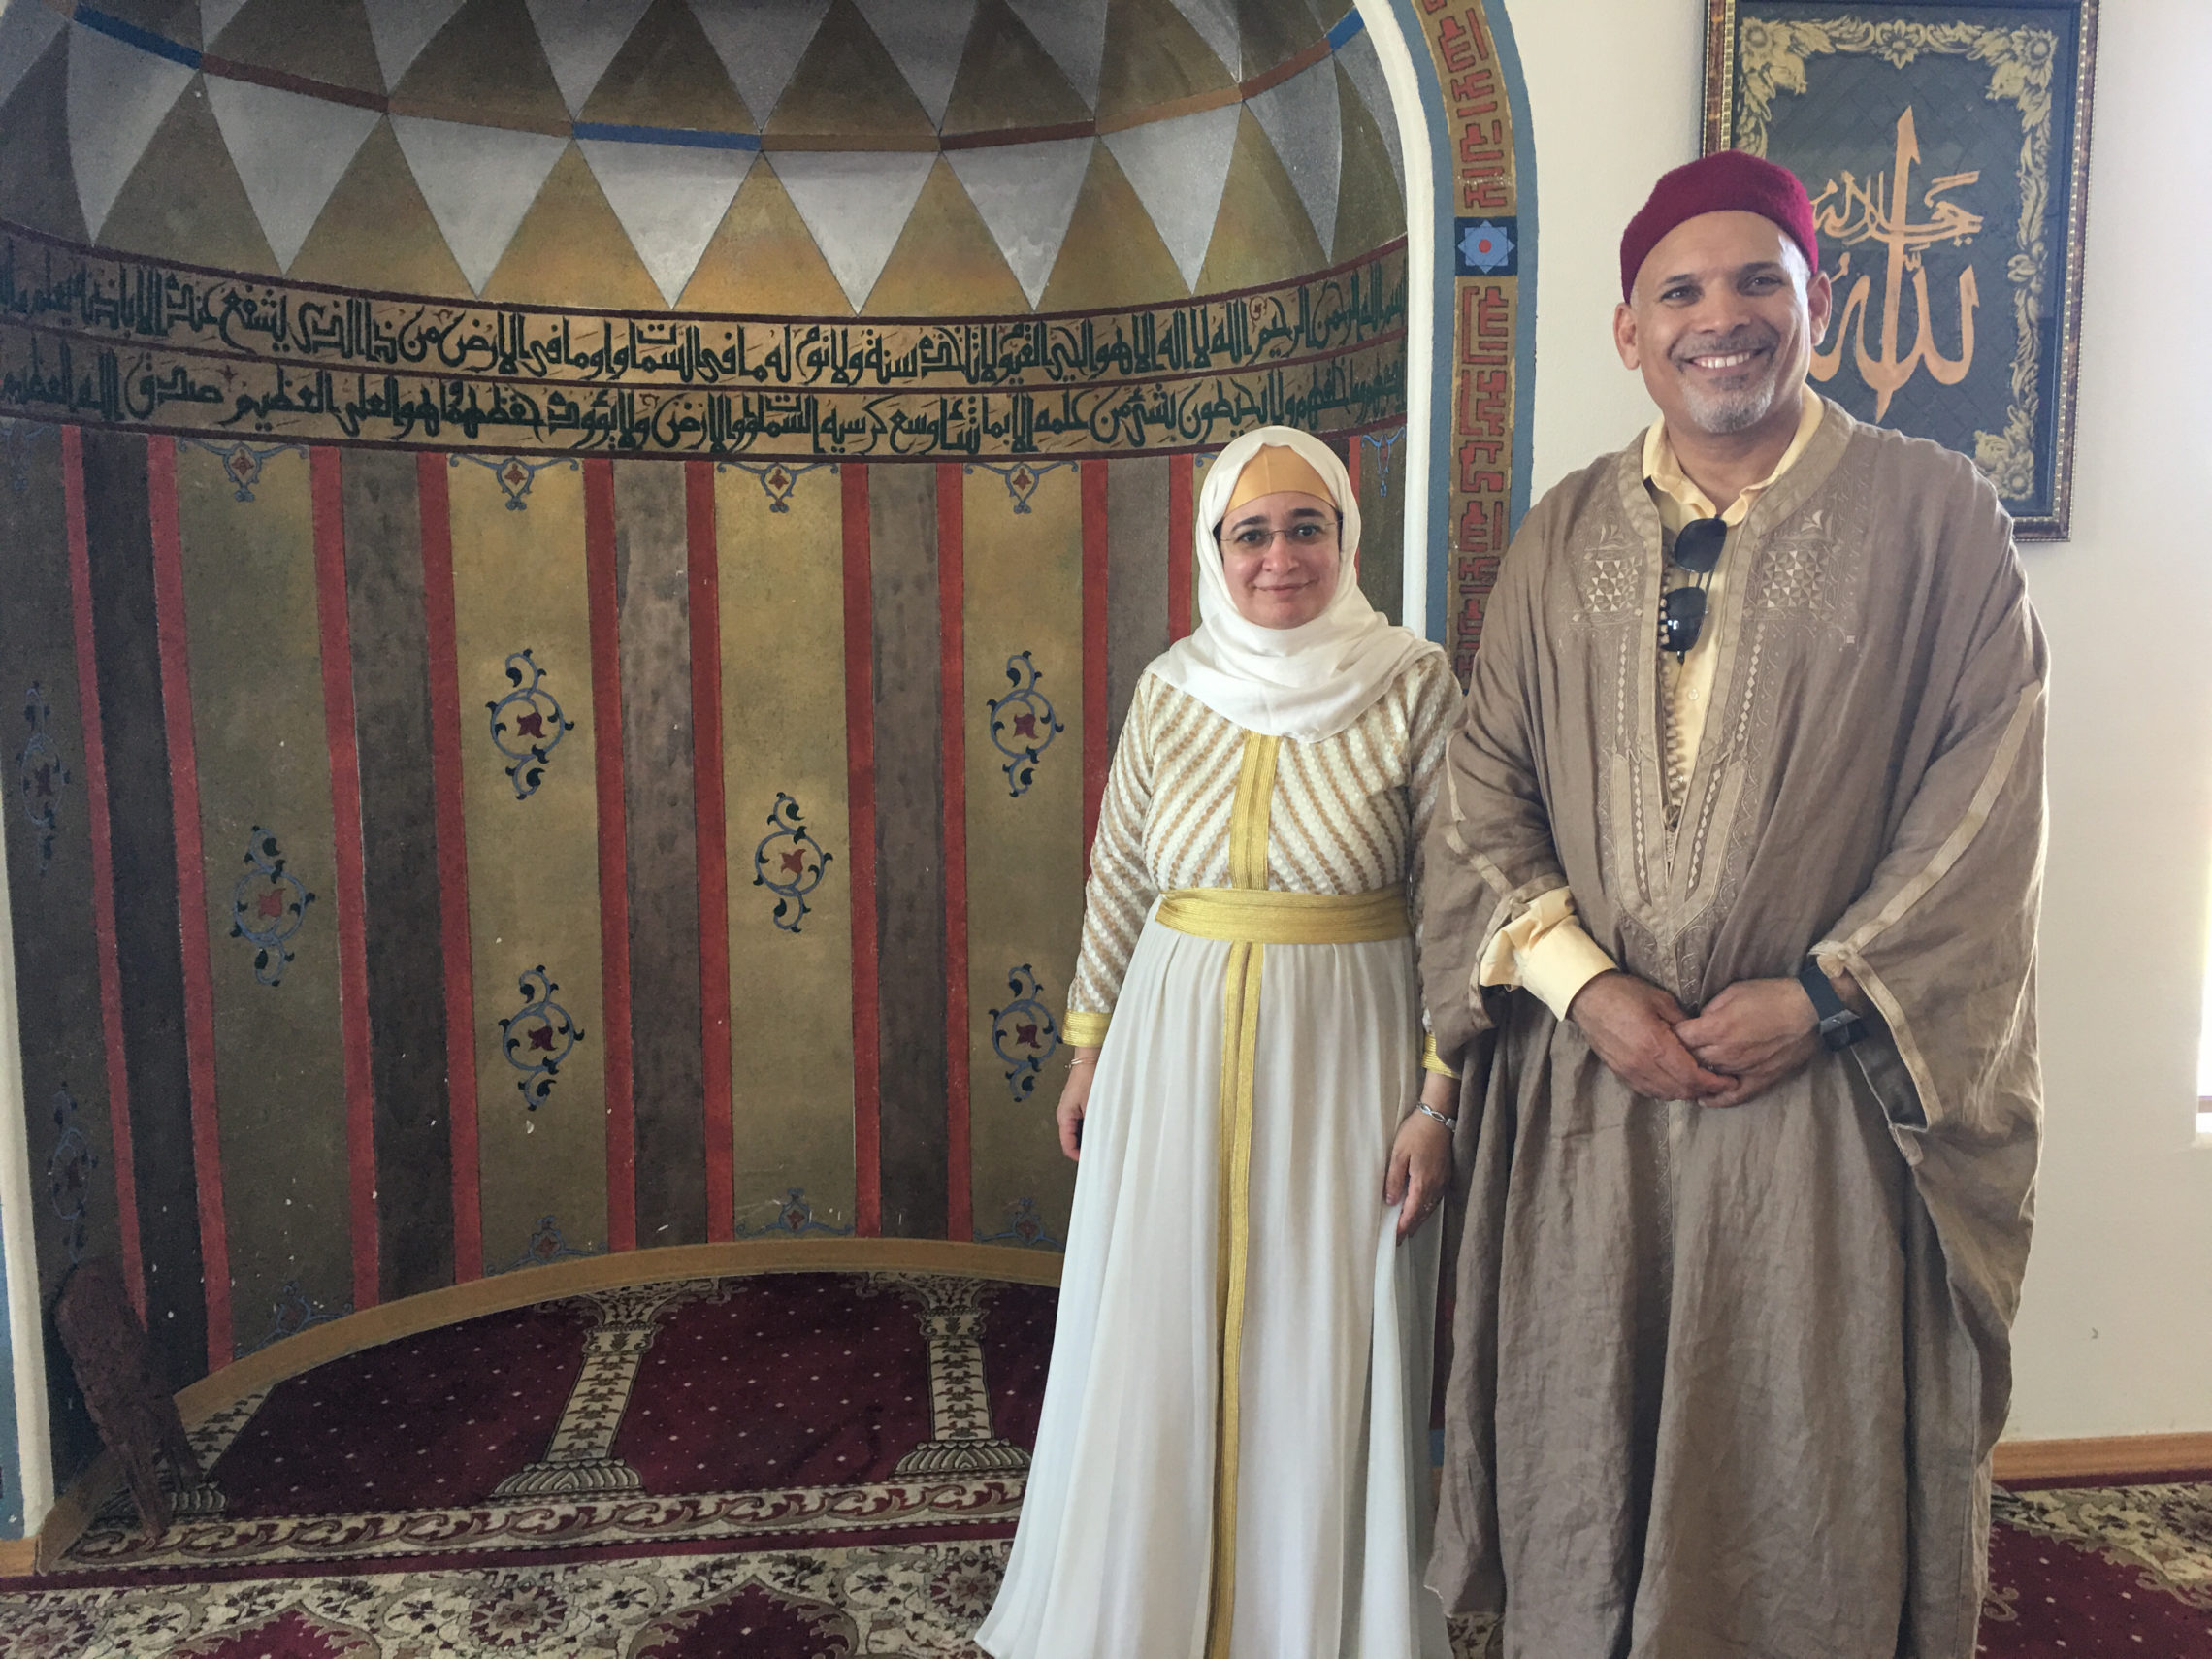 The Islamic Center of Tri Cities (ICTC) hosted 400 people for Eid-al Fitr this year. Hala Abdelall (left) is a volunteer who helped organize the festivities and Ridha Mabruki [right] is the President of the center. The ICTC plans to expand this year with 10 additional classrooms and a bigger prayer hall for the growing community. CREDIT: ESMY JIMENEZ/NWPB